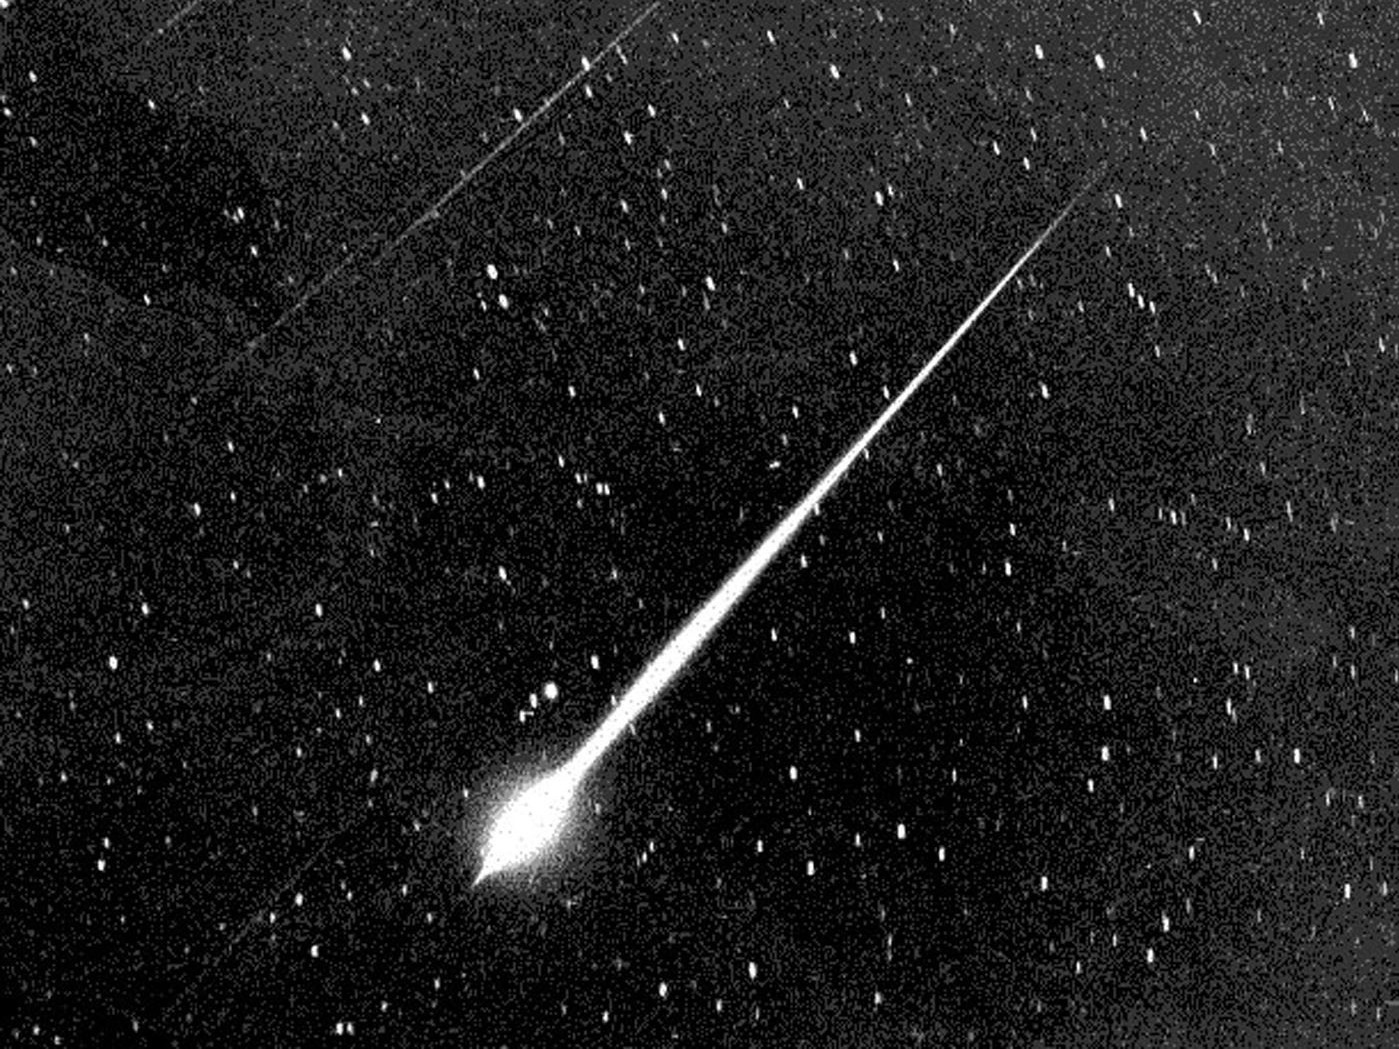 The Lyrids meteor shower is peaking. Here’s how to enjoy it with a bright moon